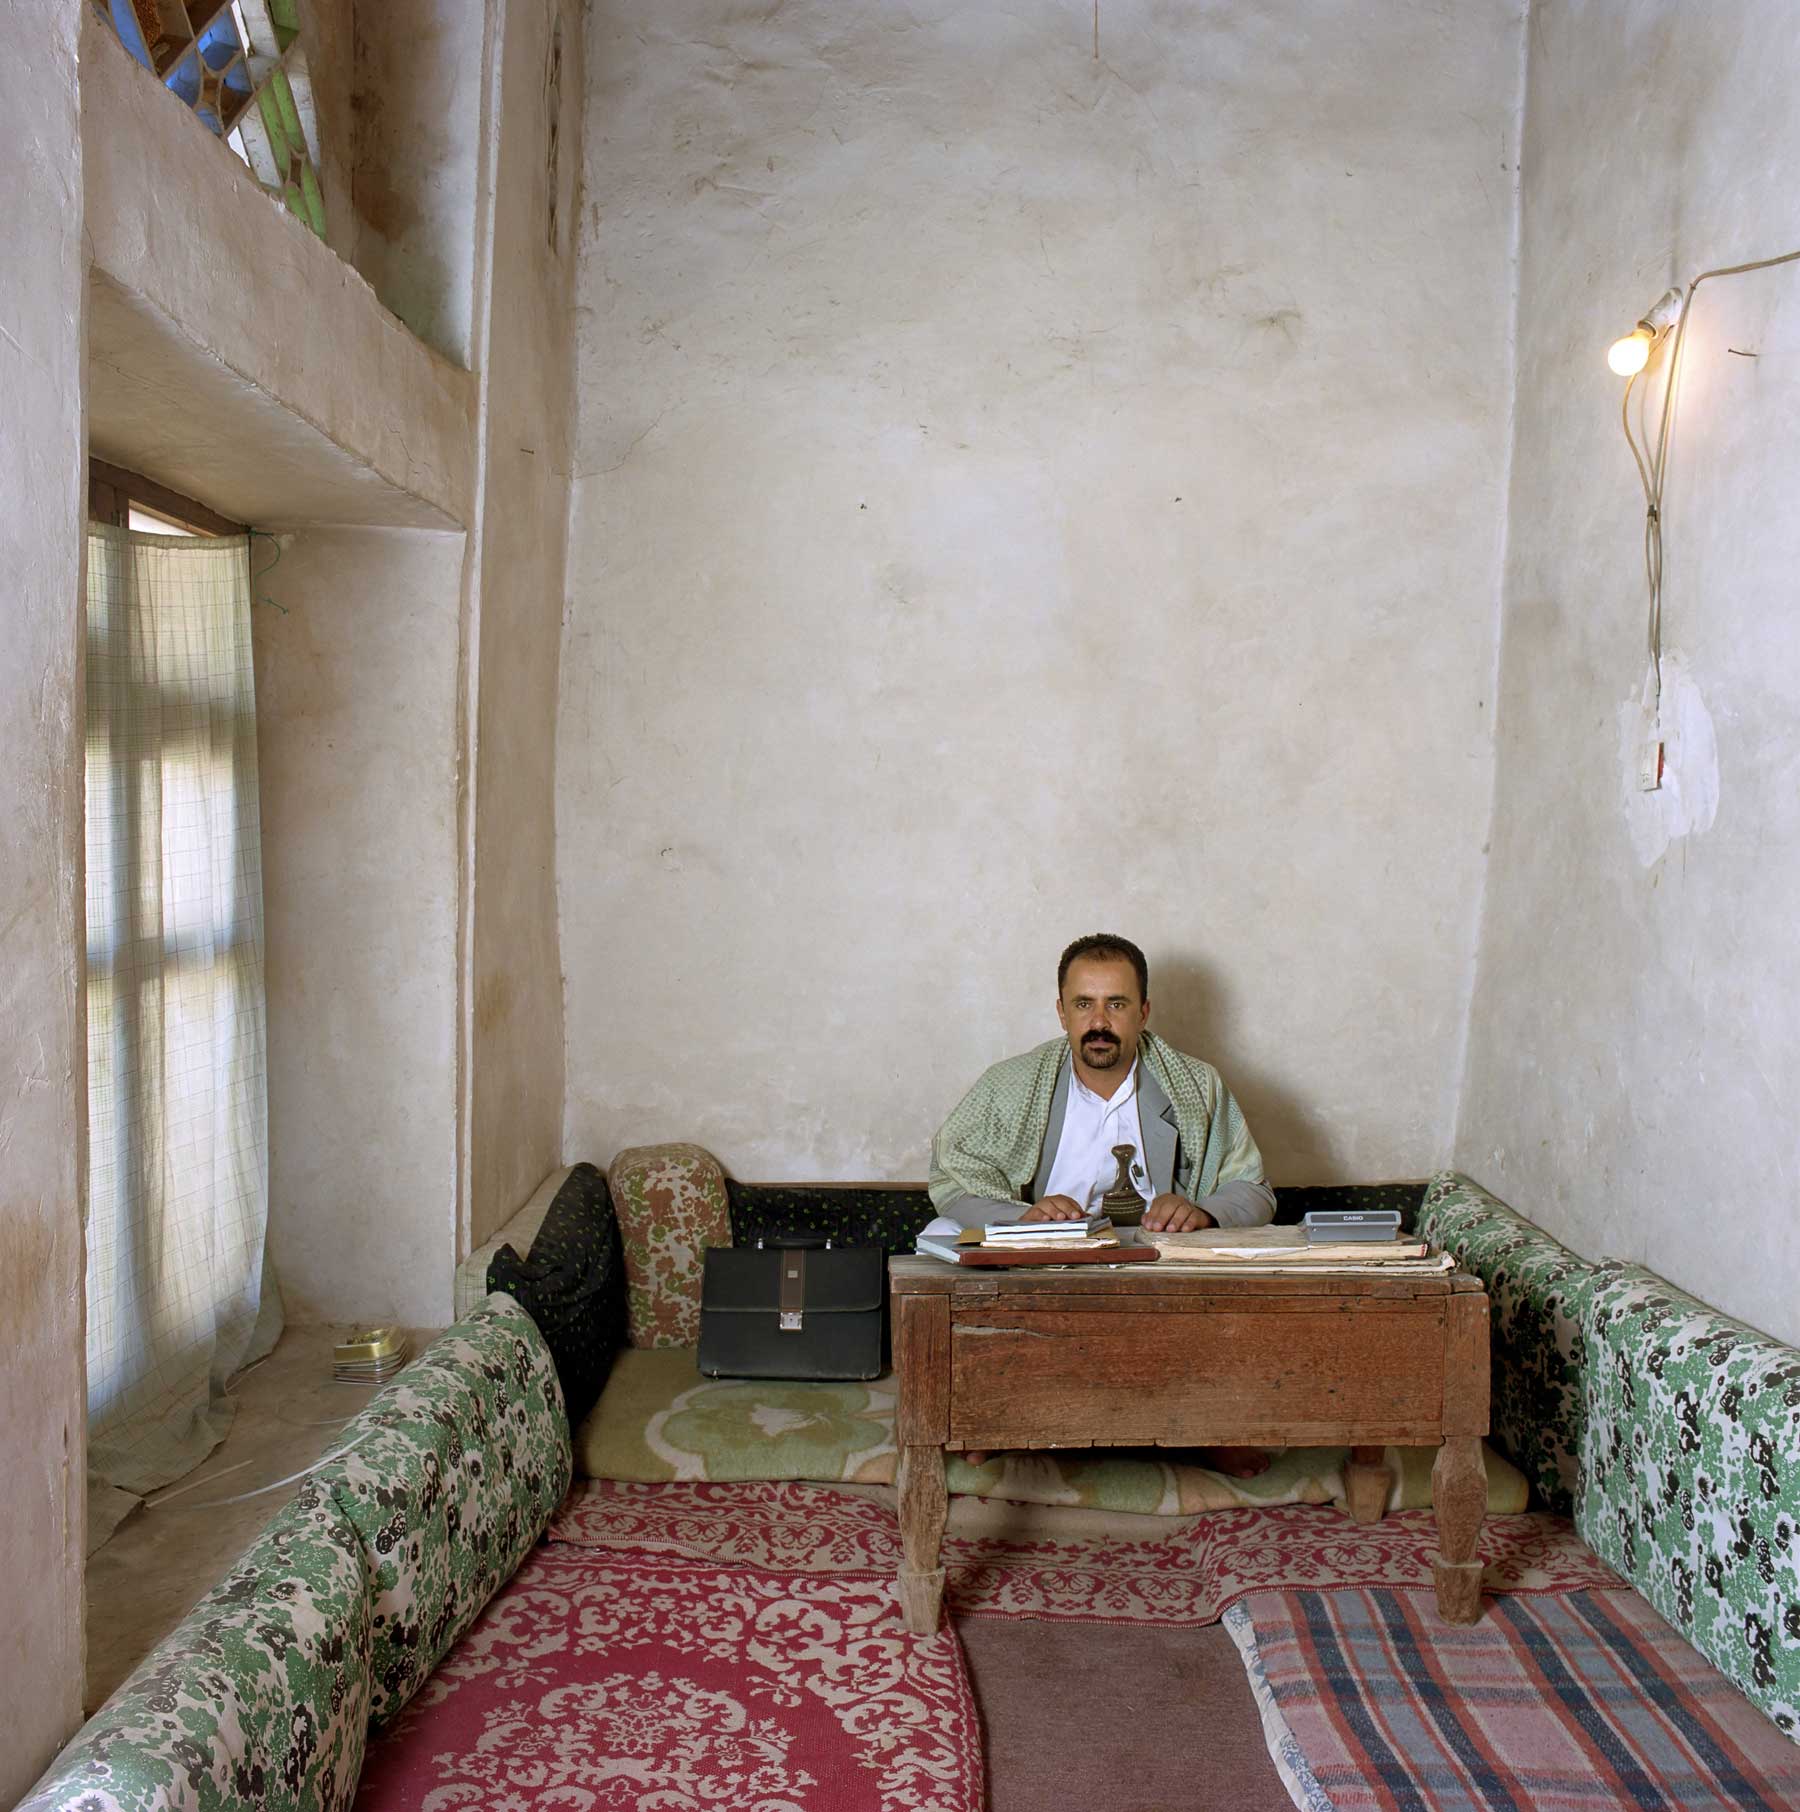 Yemen-28/2006 [Shi., MHA (b. 1962)]
Mohammed Hamid Azein (b. 1962) collects the monthly water bills in the district of Shibam, Al-Mahwit Governorate. Monthly salary: 21,600 rial ($ 121, euro 83), but he hadnÍt received a salary for five months.